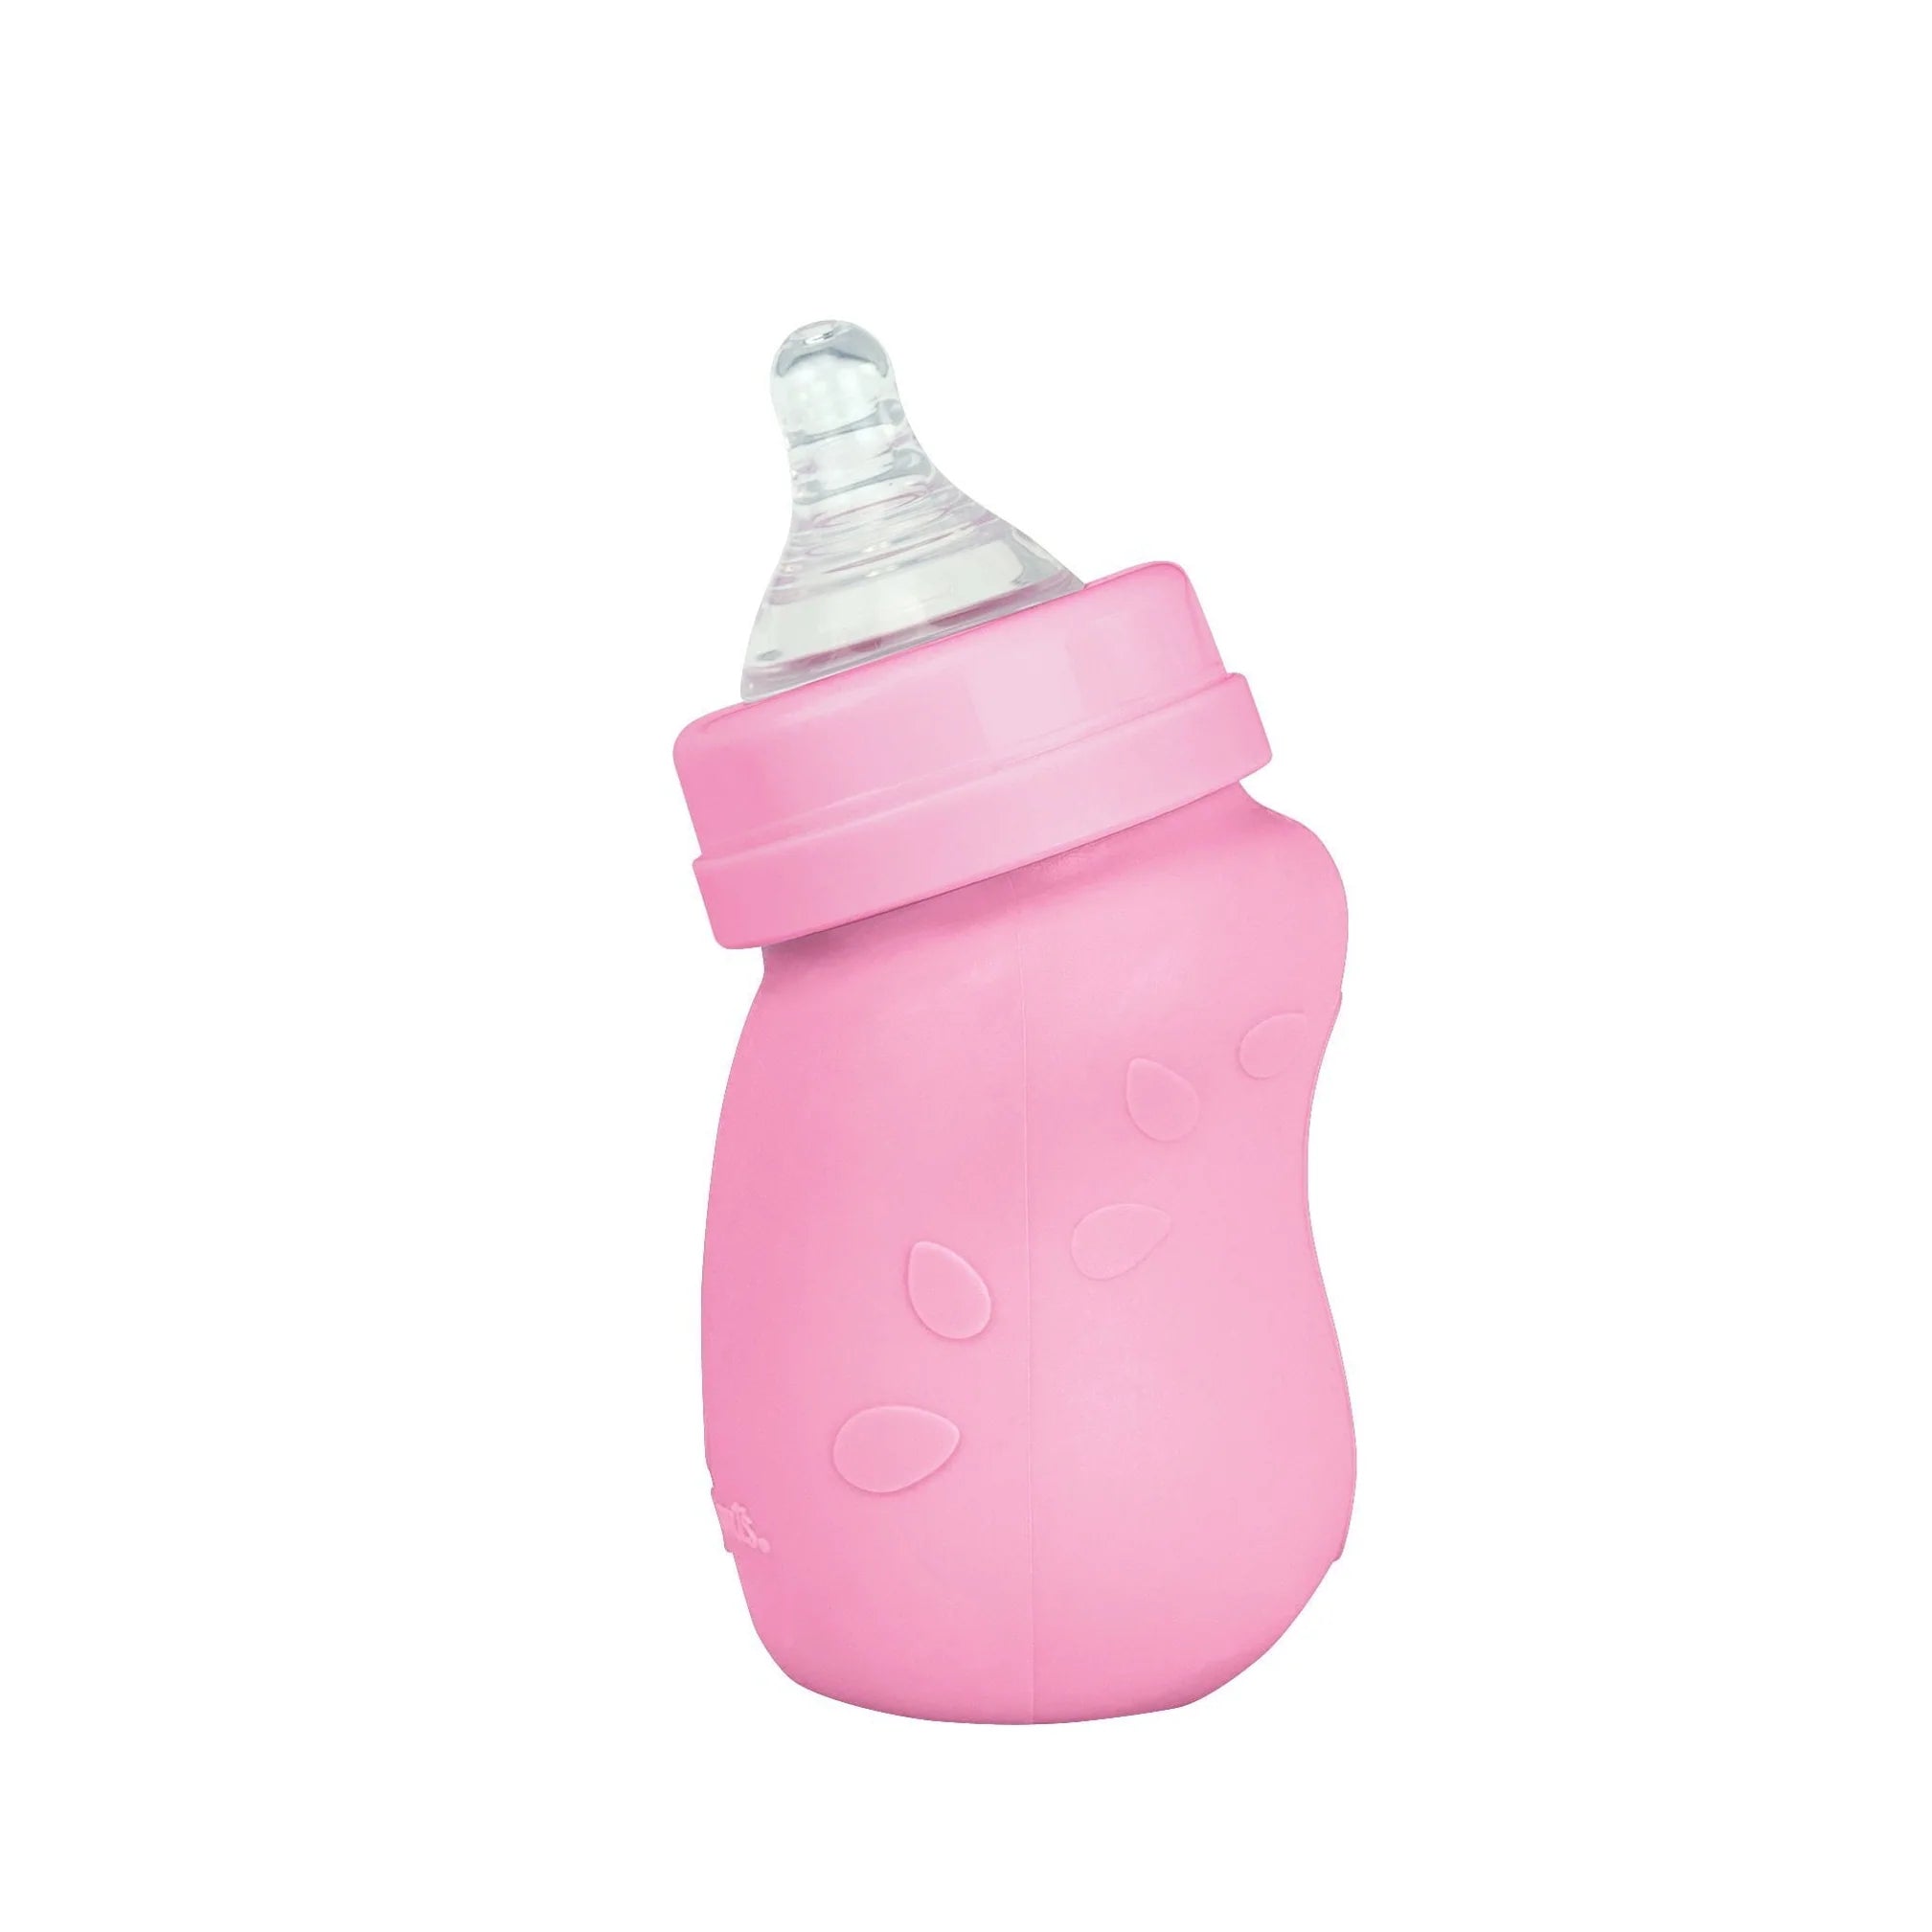 Sprout Ware Baby Bottle Made From Plants and Glass 5oz (2 colores)